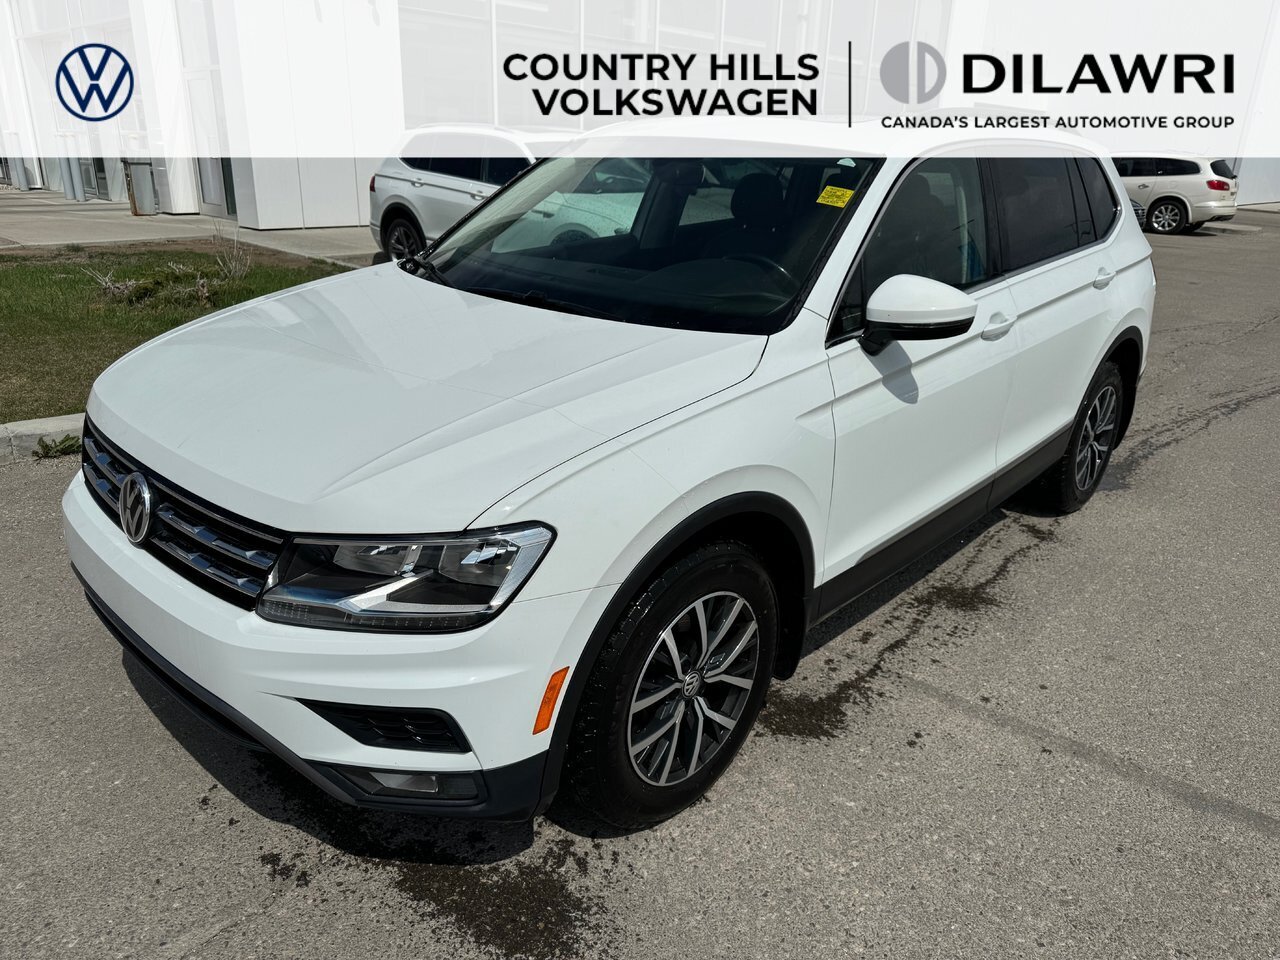 2018 Volkswagen Tiguan Comfortline AWD 2.0L TSI Locally Owned / 